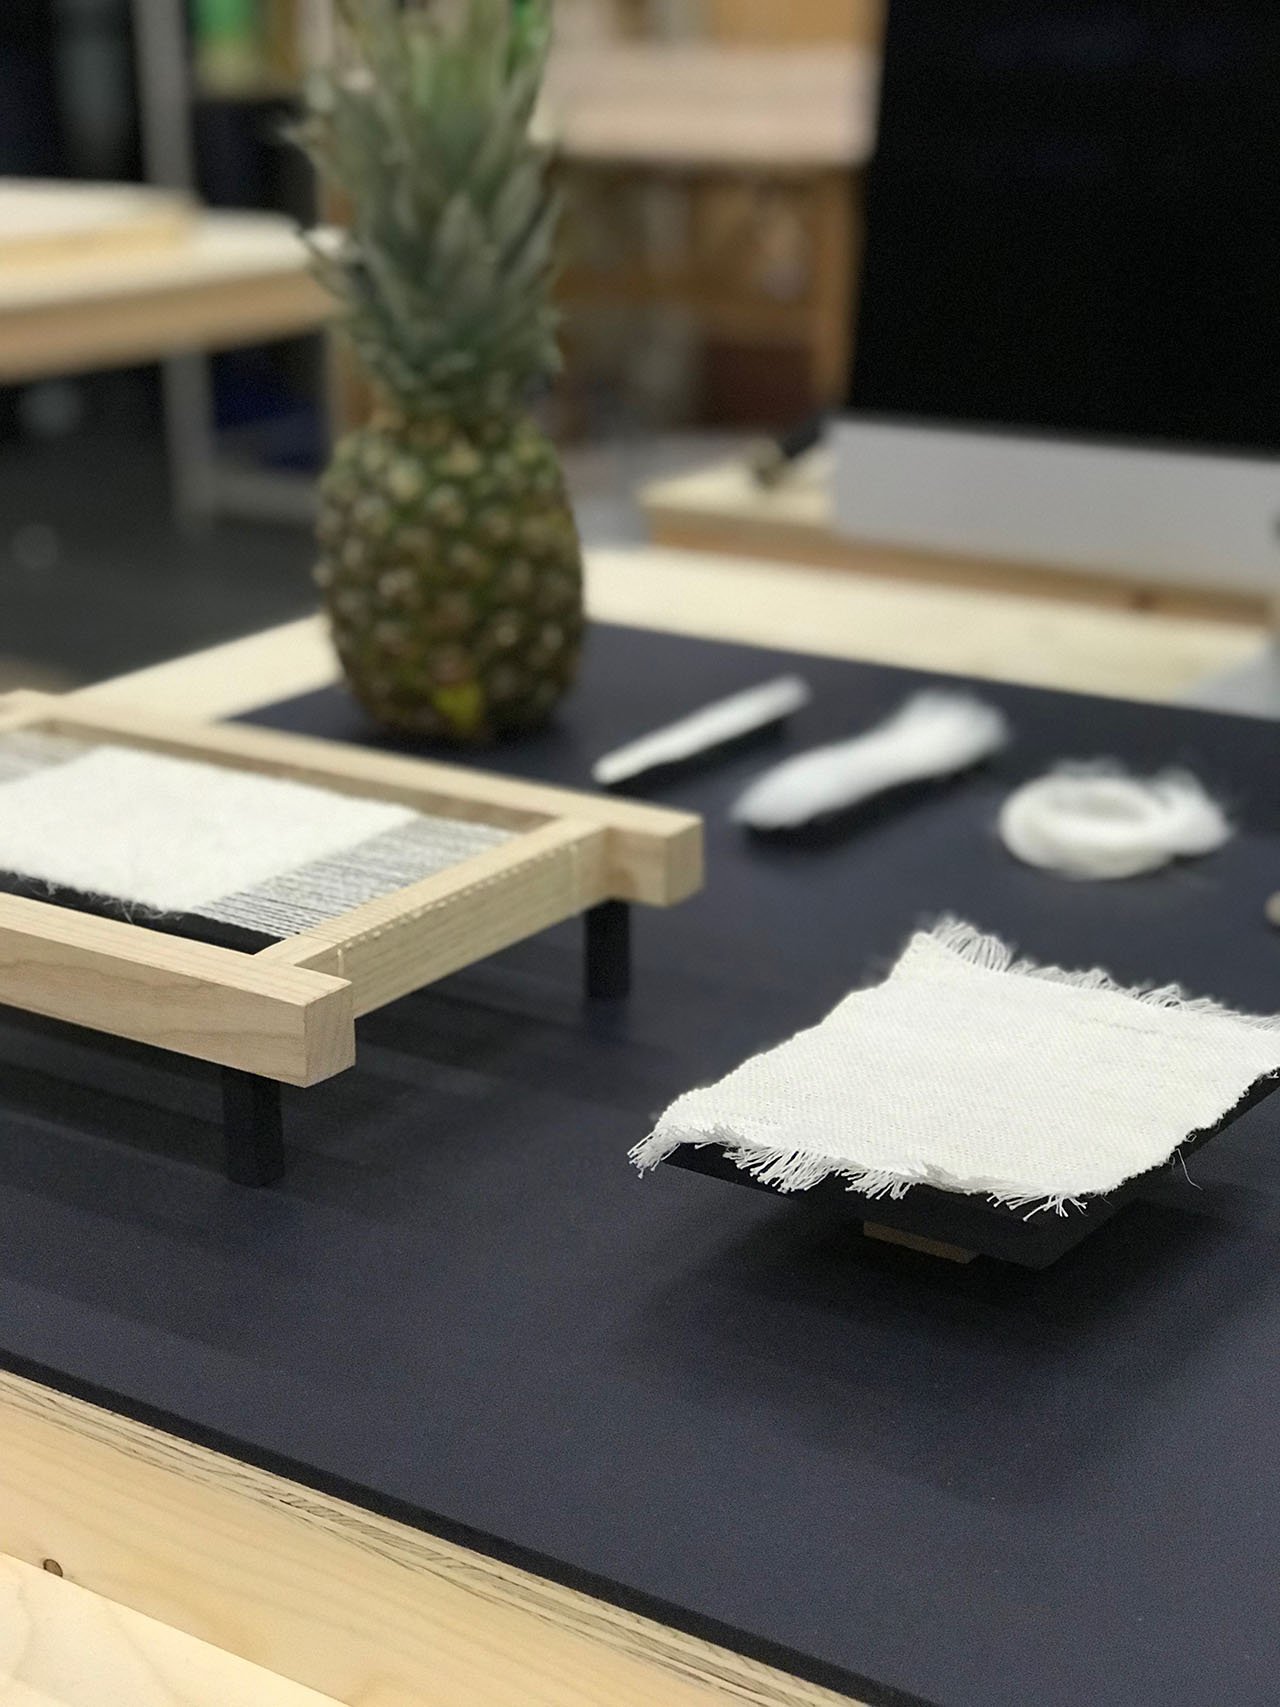 Pineapple Wool by Nathalie Spencer at  Material Futures exhibition (Based at Central Saint Martins, UAL, Material Futures is a two-year Masters course dedicated to exploring how we will live in the future through trans-disciplinary practice and collaboration).